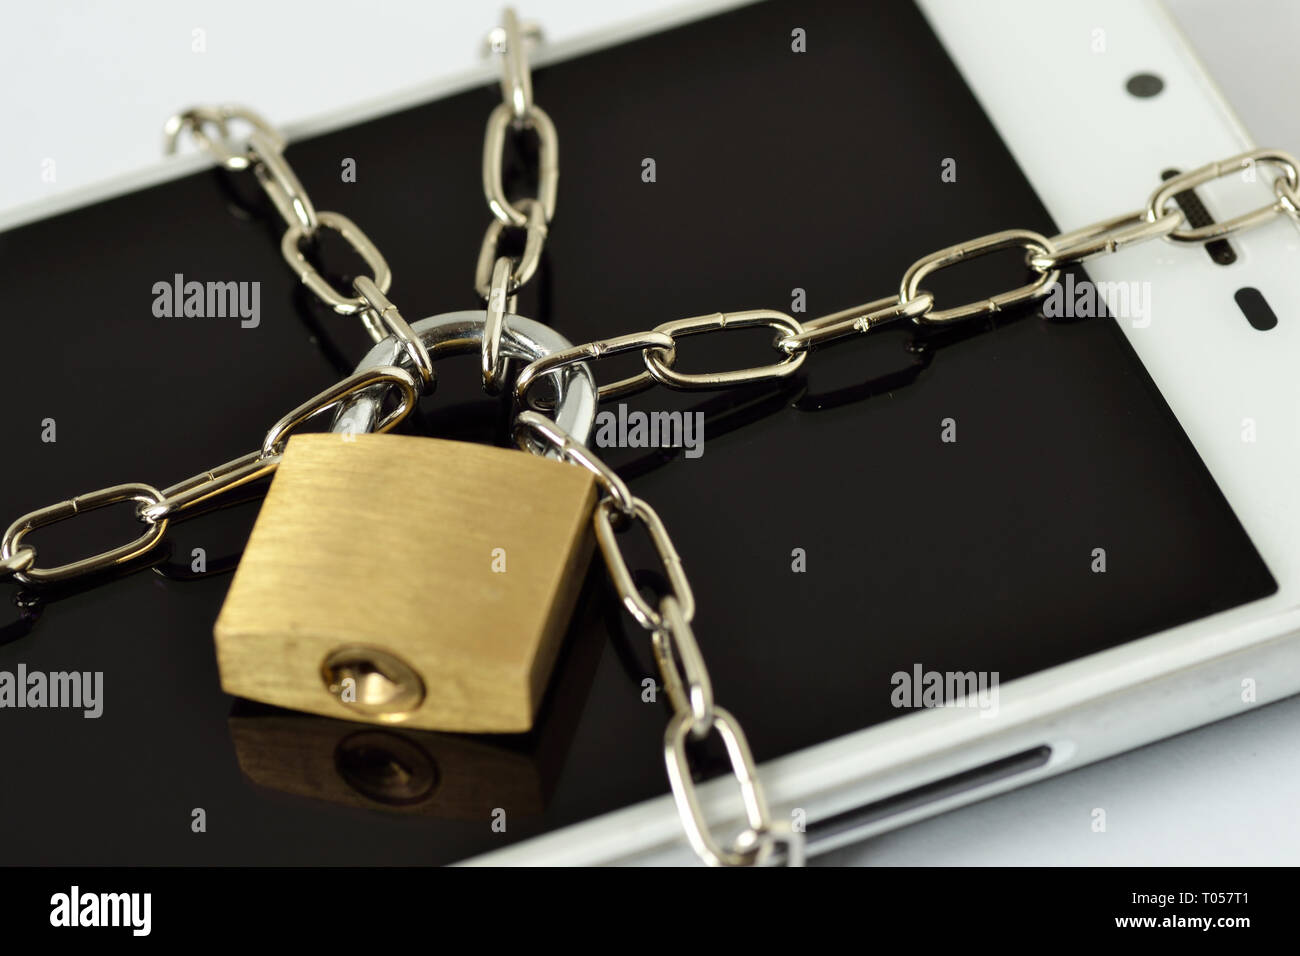 Close-up of smartphone locked with chain and padlock - Concept of mobile security and data privacy Stock Photo